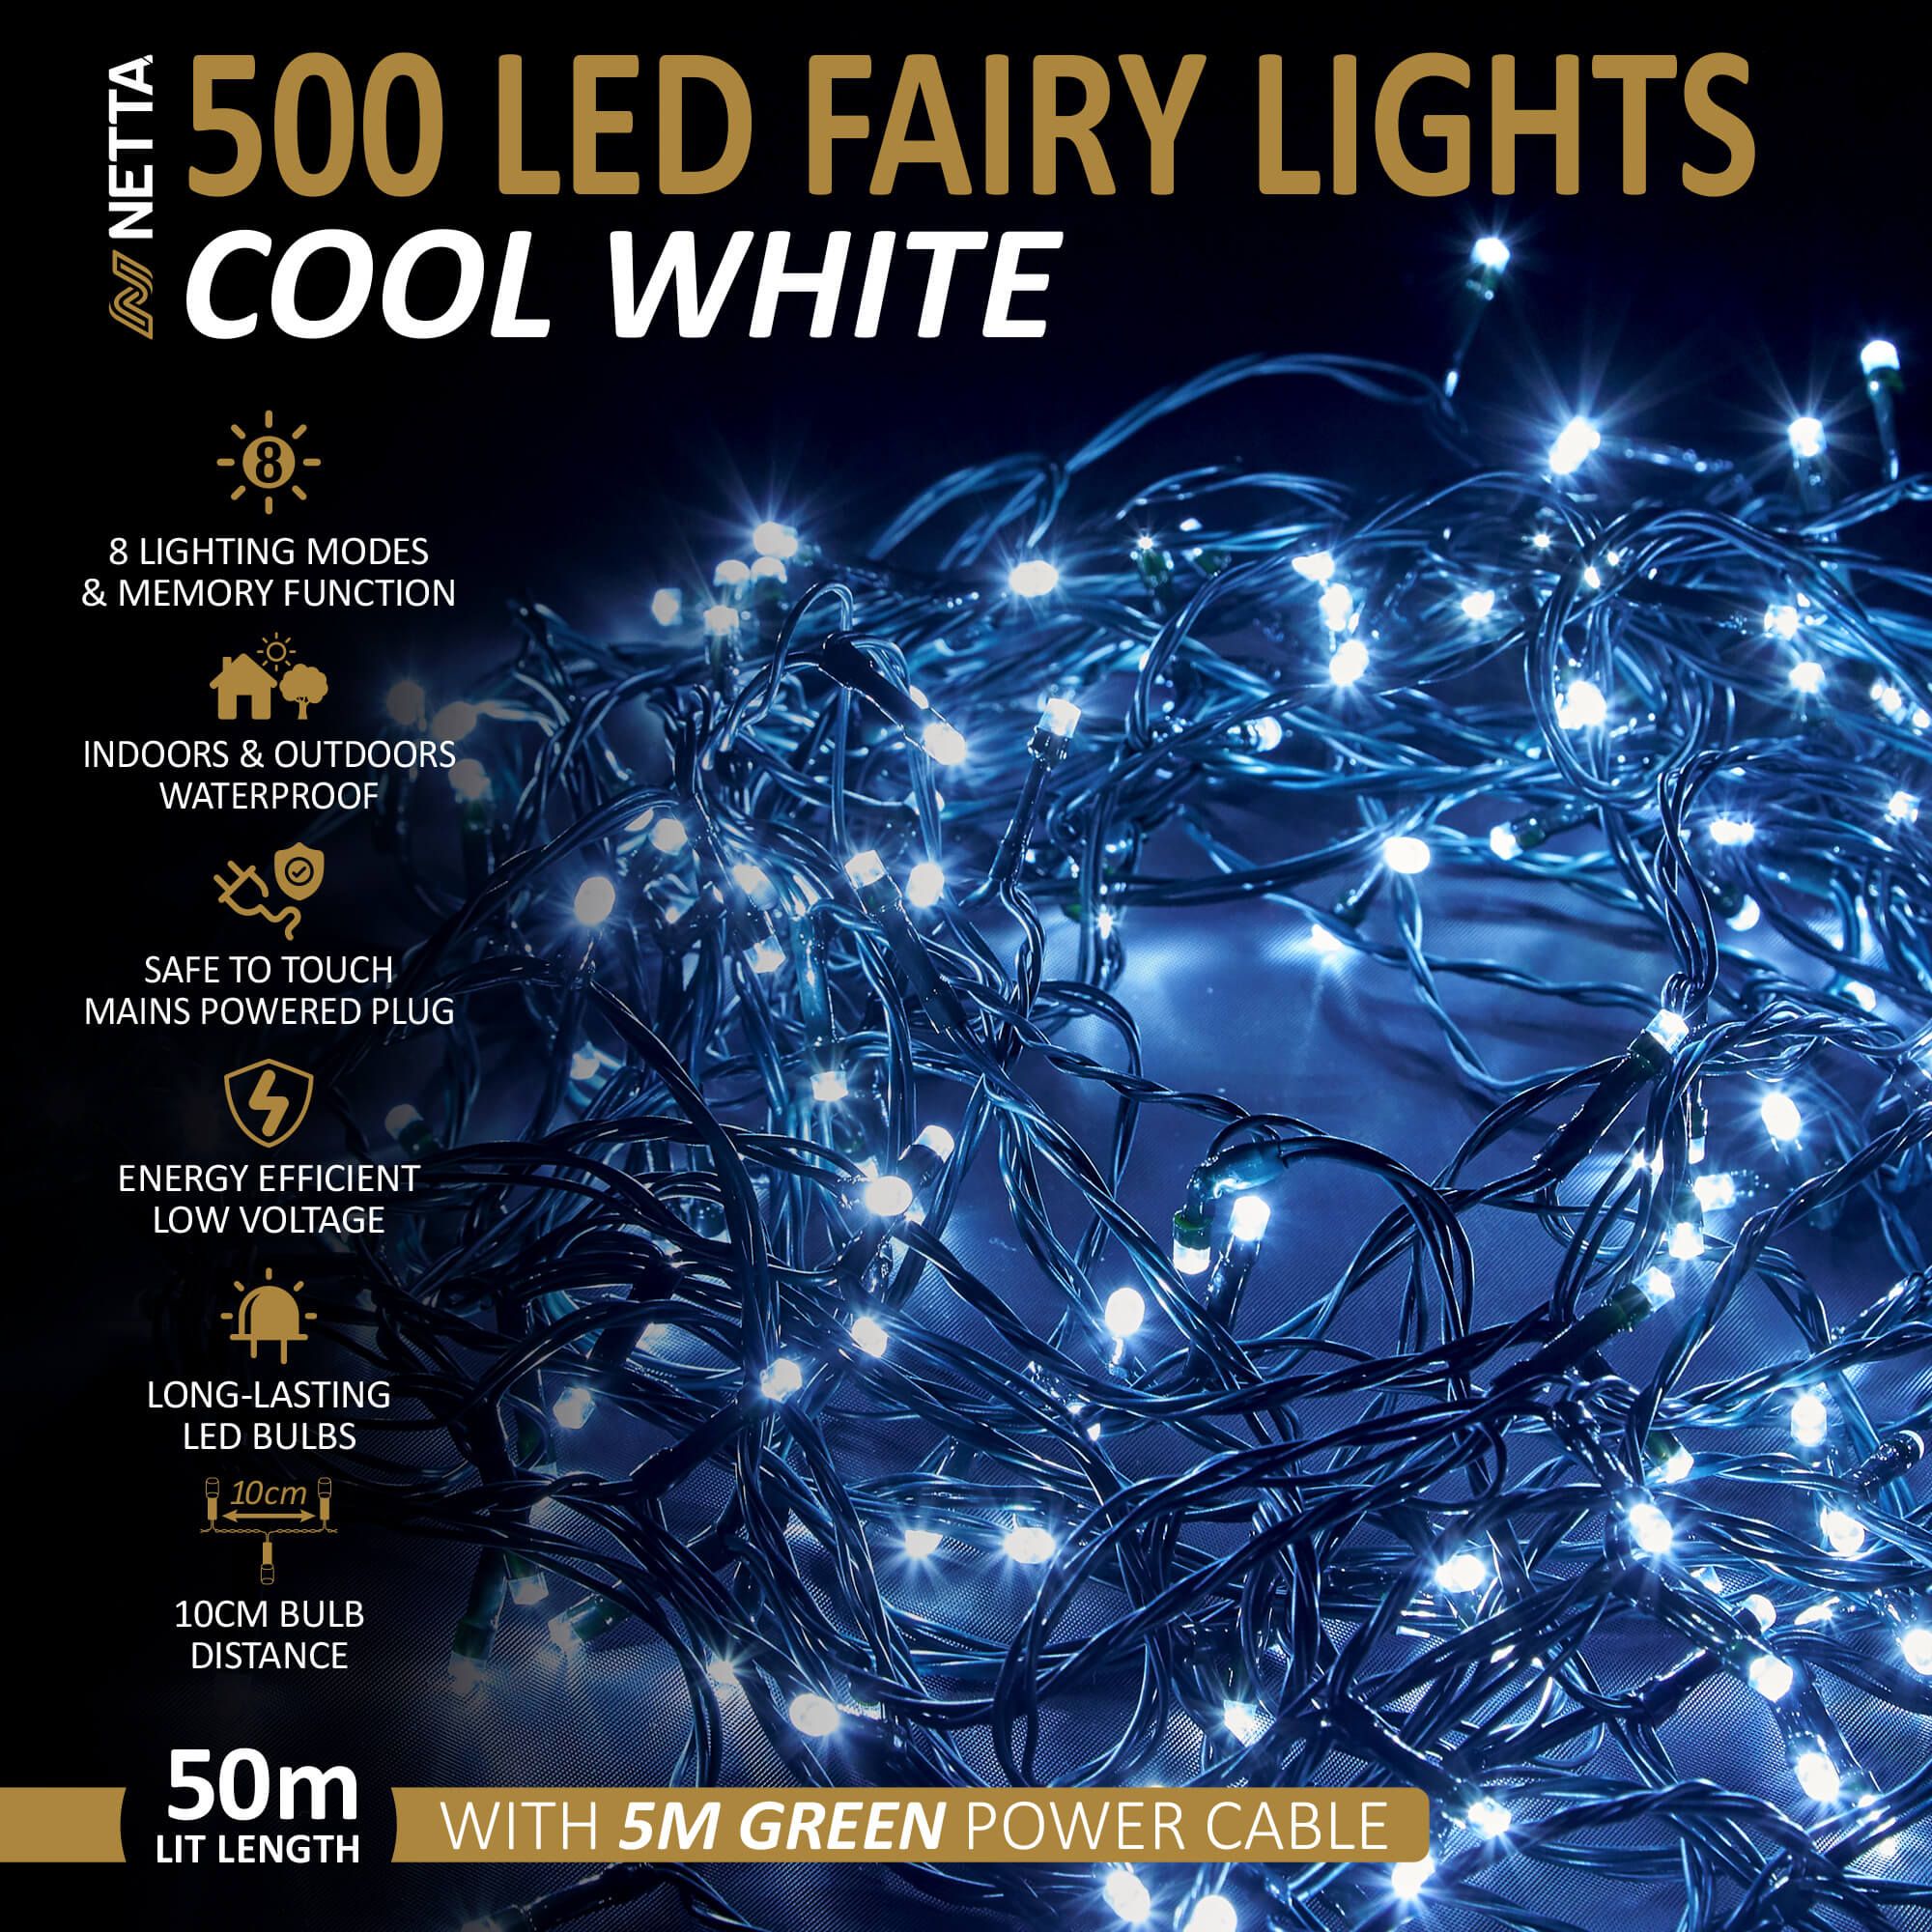 NETTA 500 LED 50M Fairy String Lights Outdoor and Indoor Plug In - Cool White